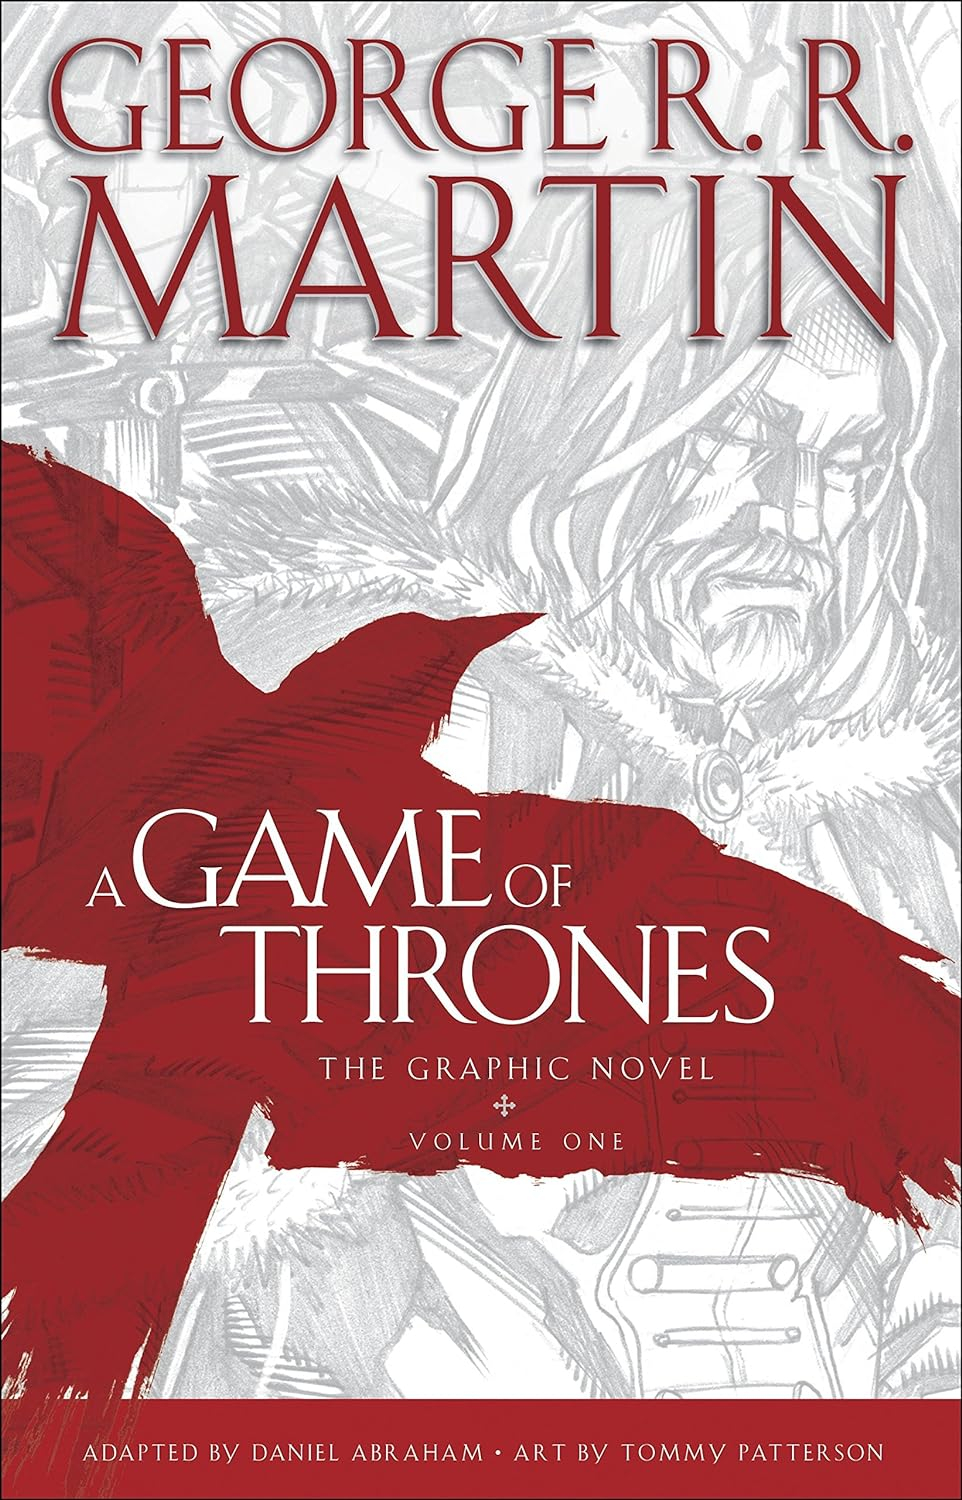 A Game of Thrones: The Graphic Novel: Volume One     Hardcover – March 27, 2012